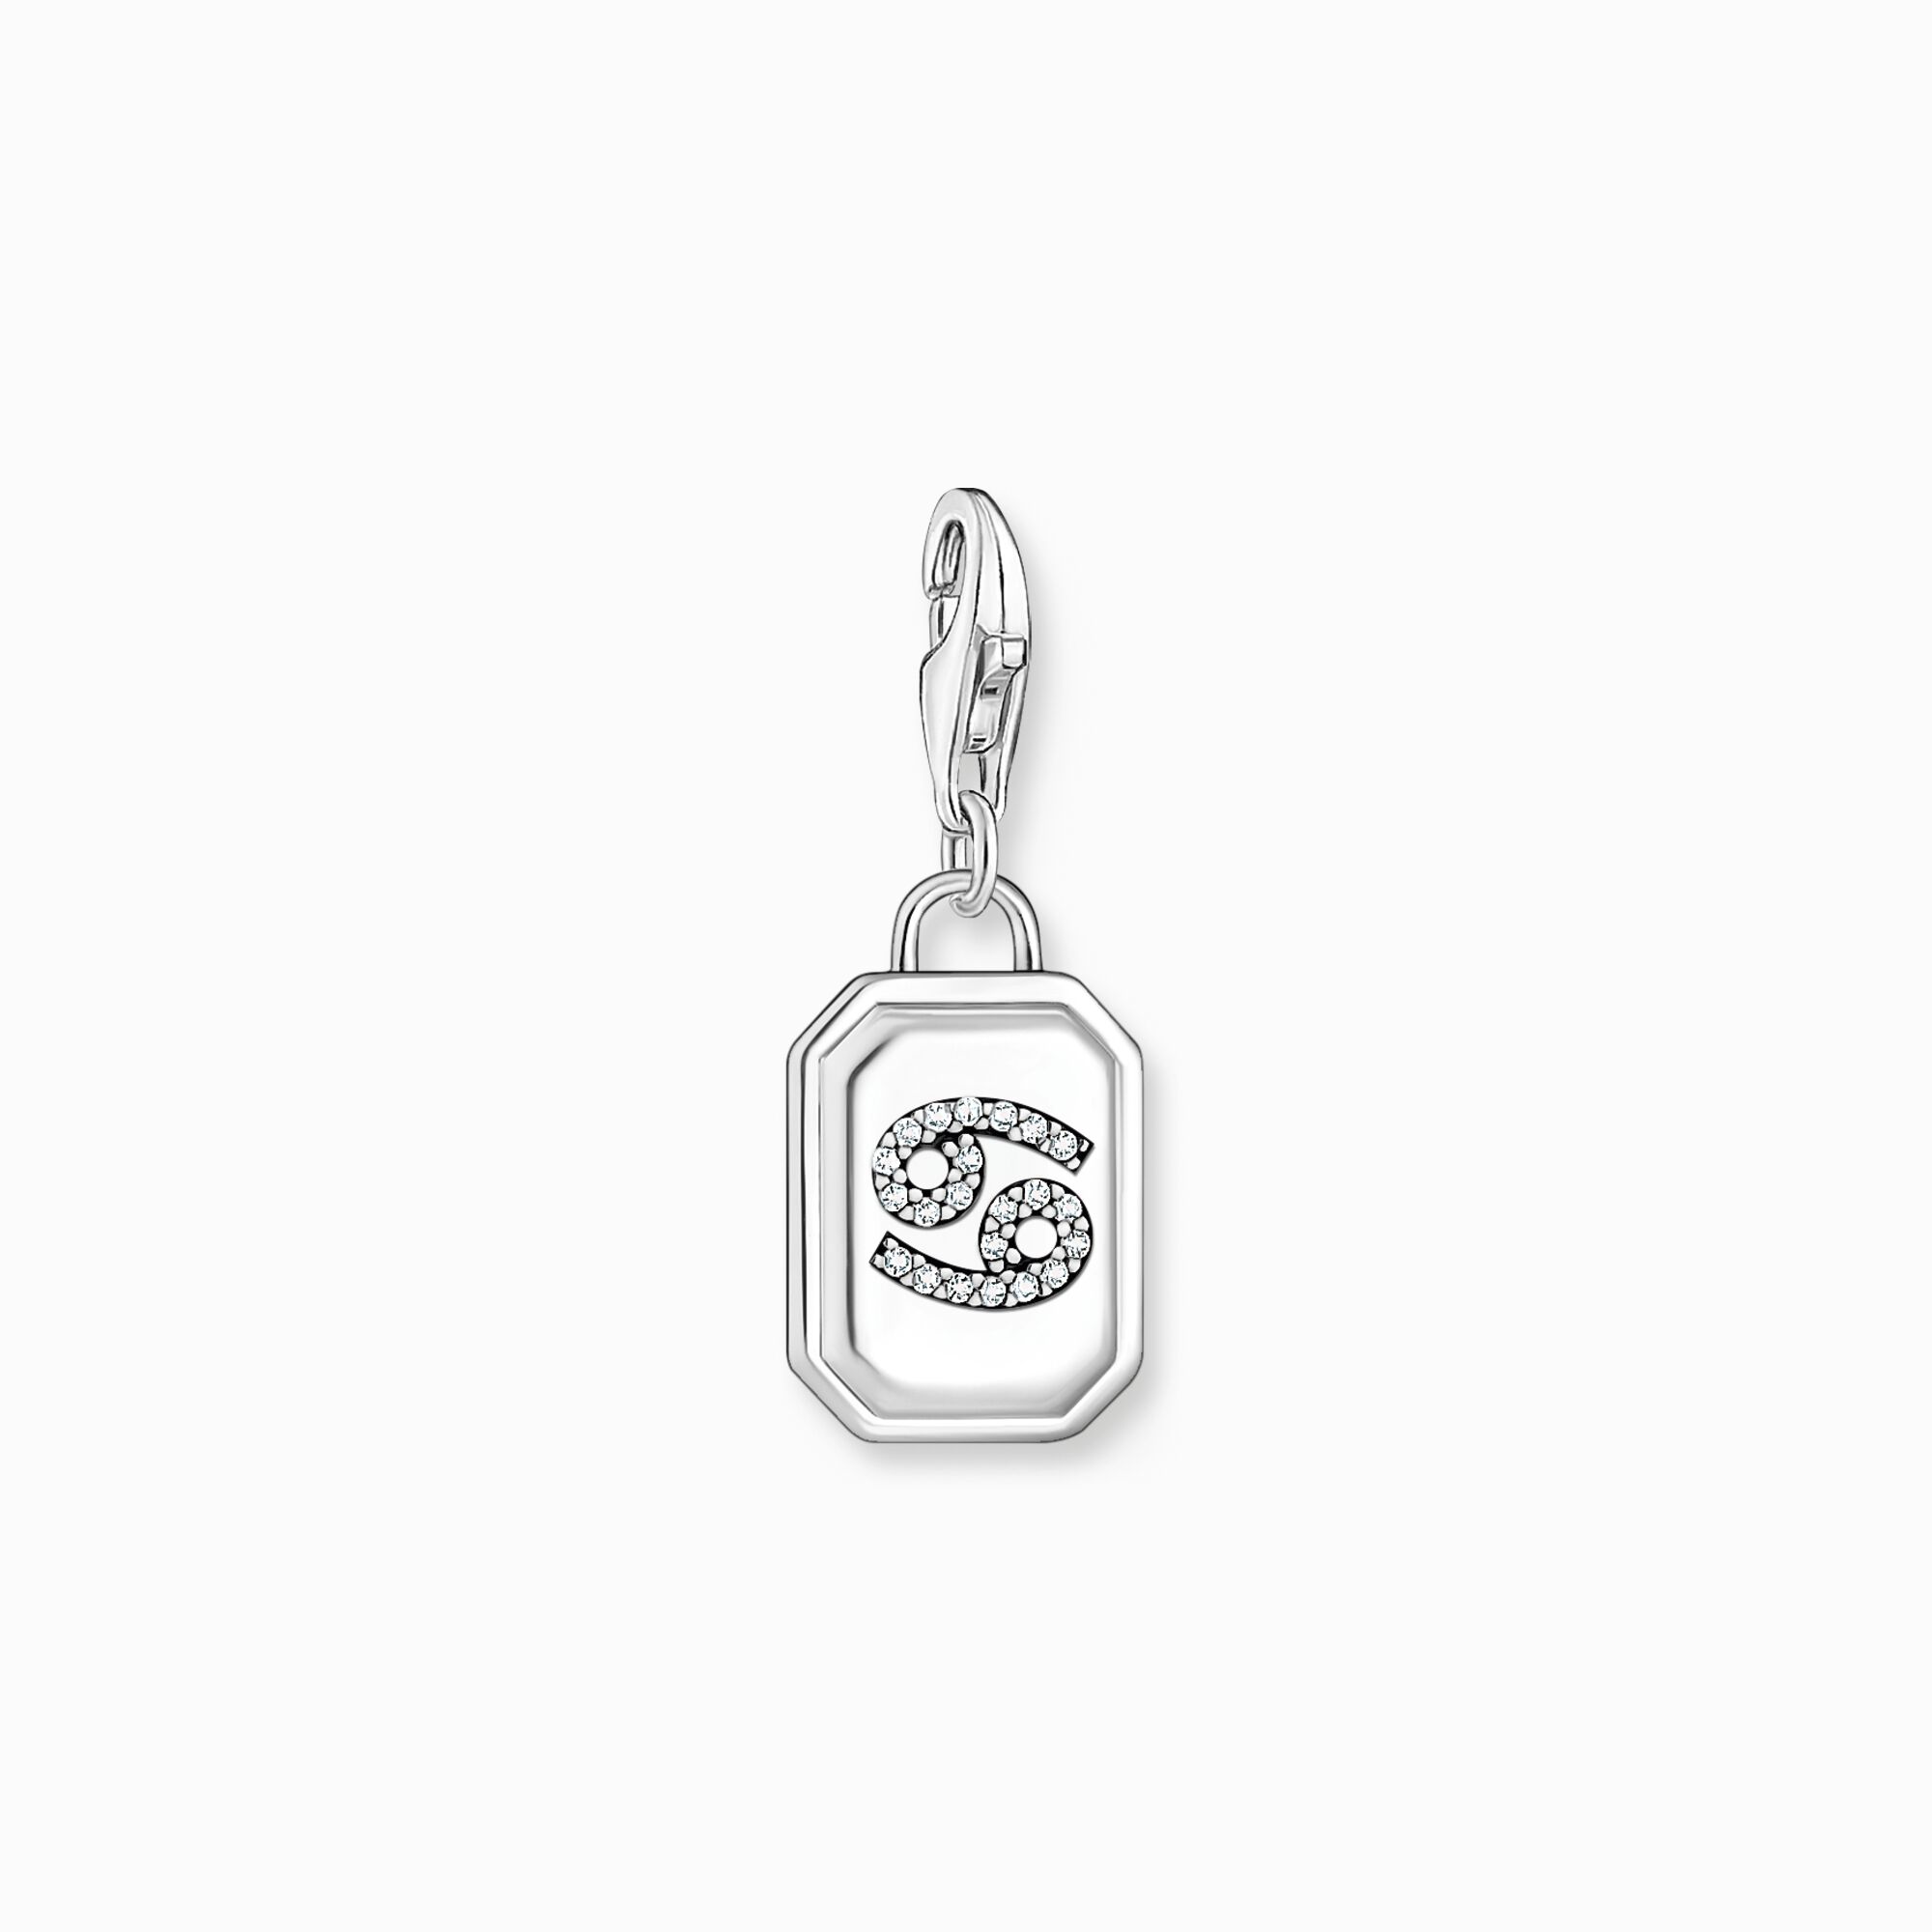 Silver charm pendant zodiac sign Cancer with zirconia from the Charm Club collection in the THOMAS SABO online store